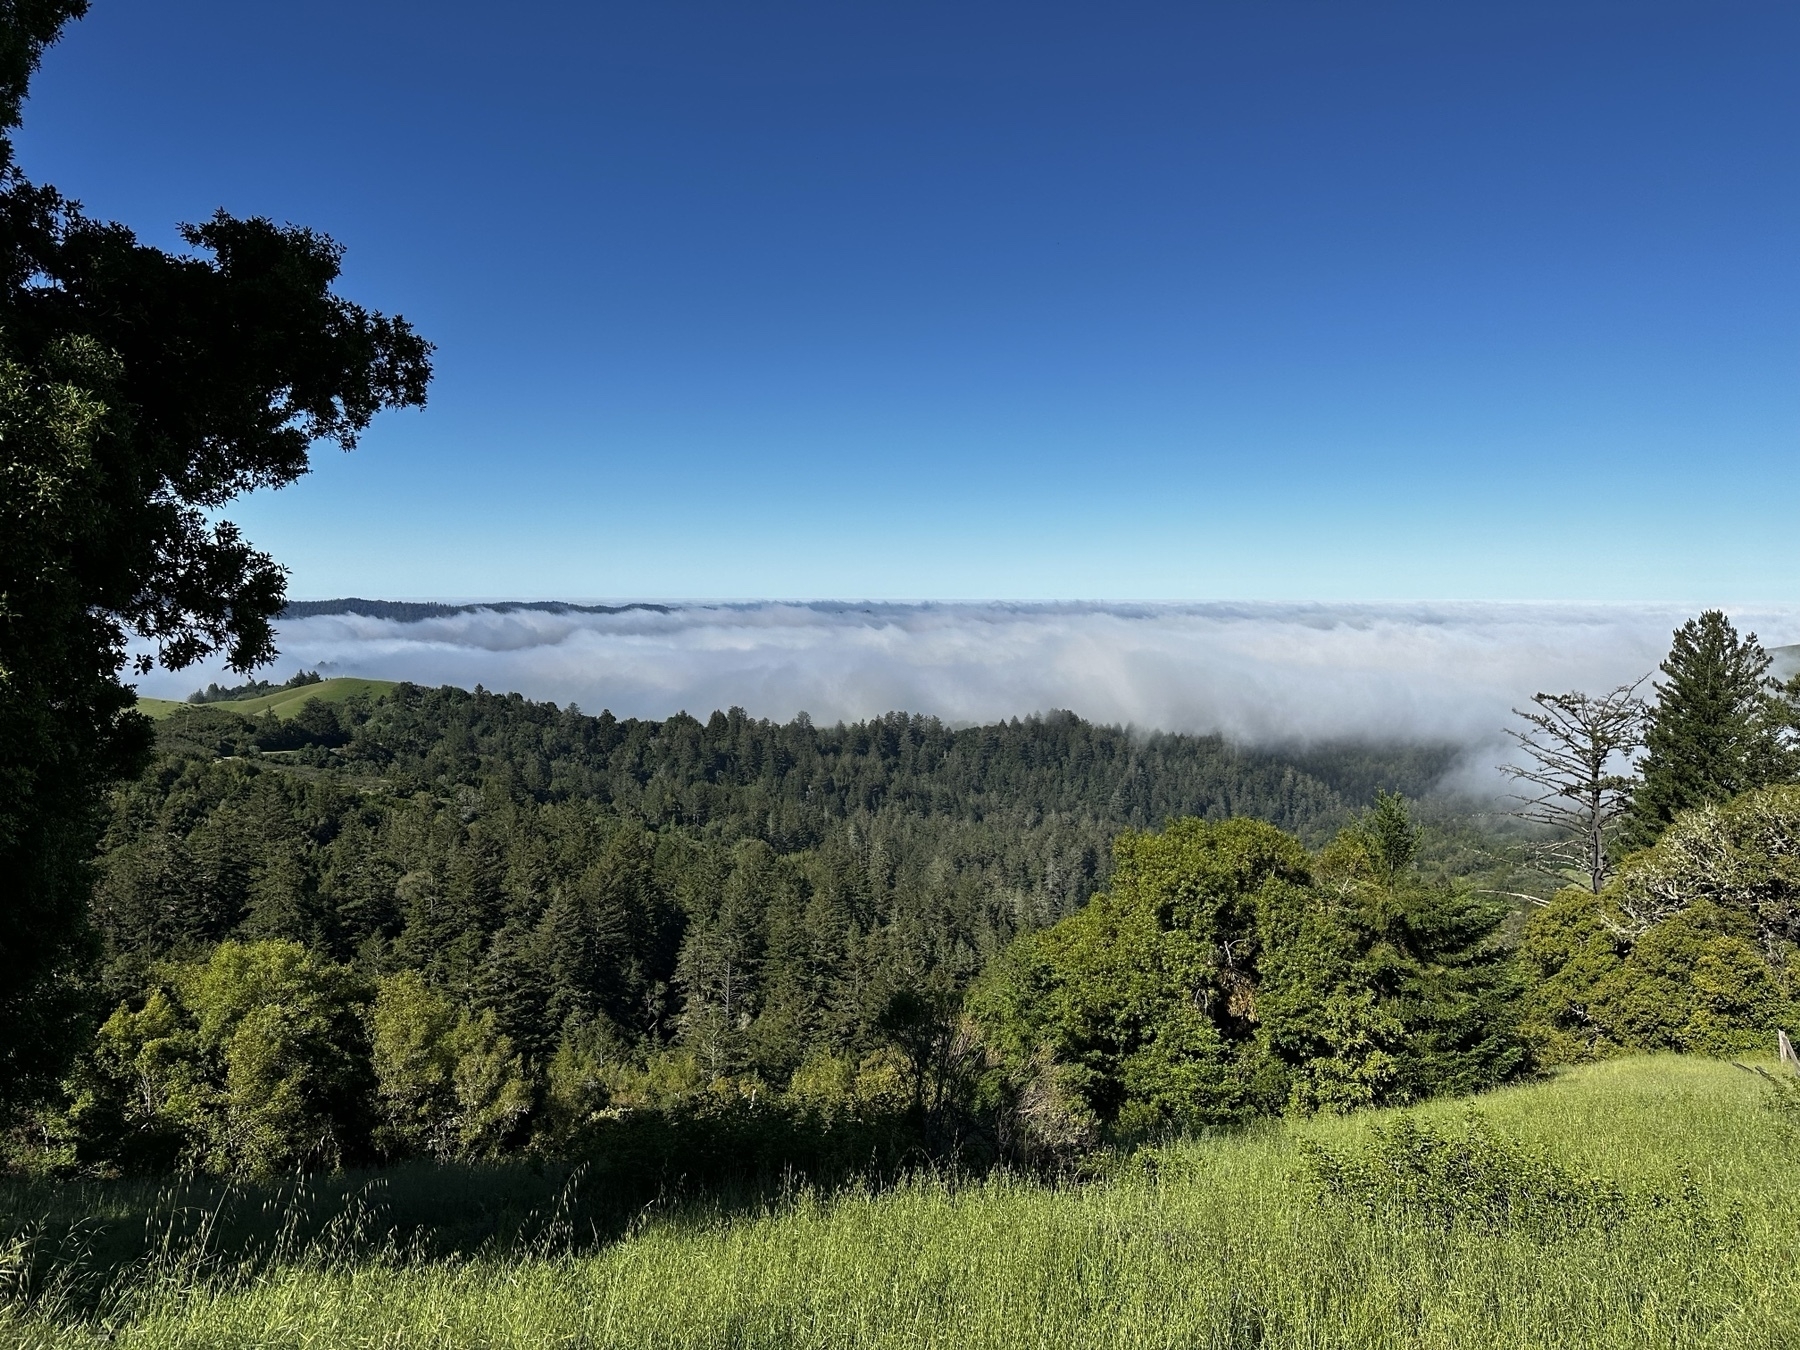 A view of a northern California valley from the top of a hill, with clouds collected in the valley